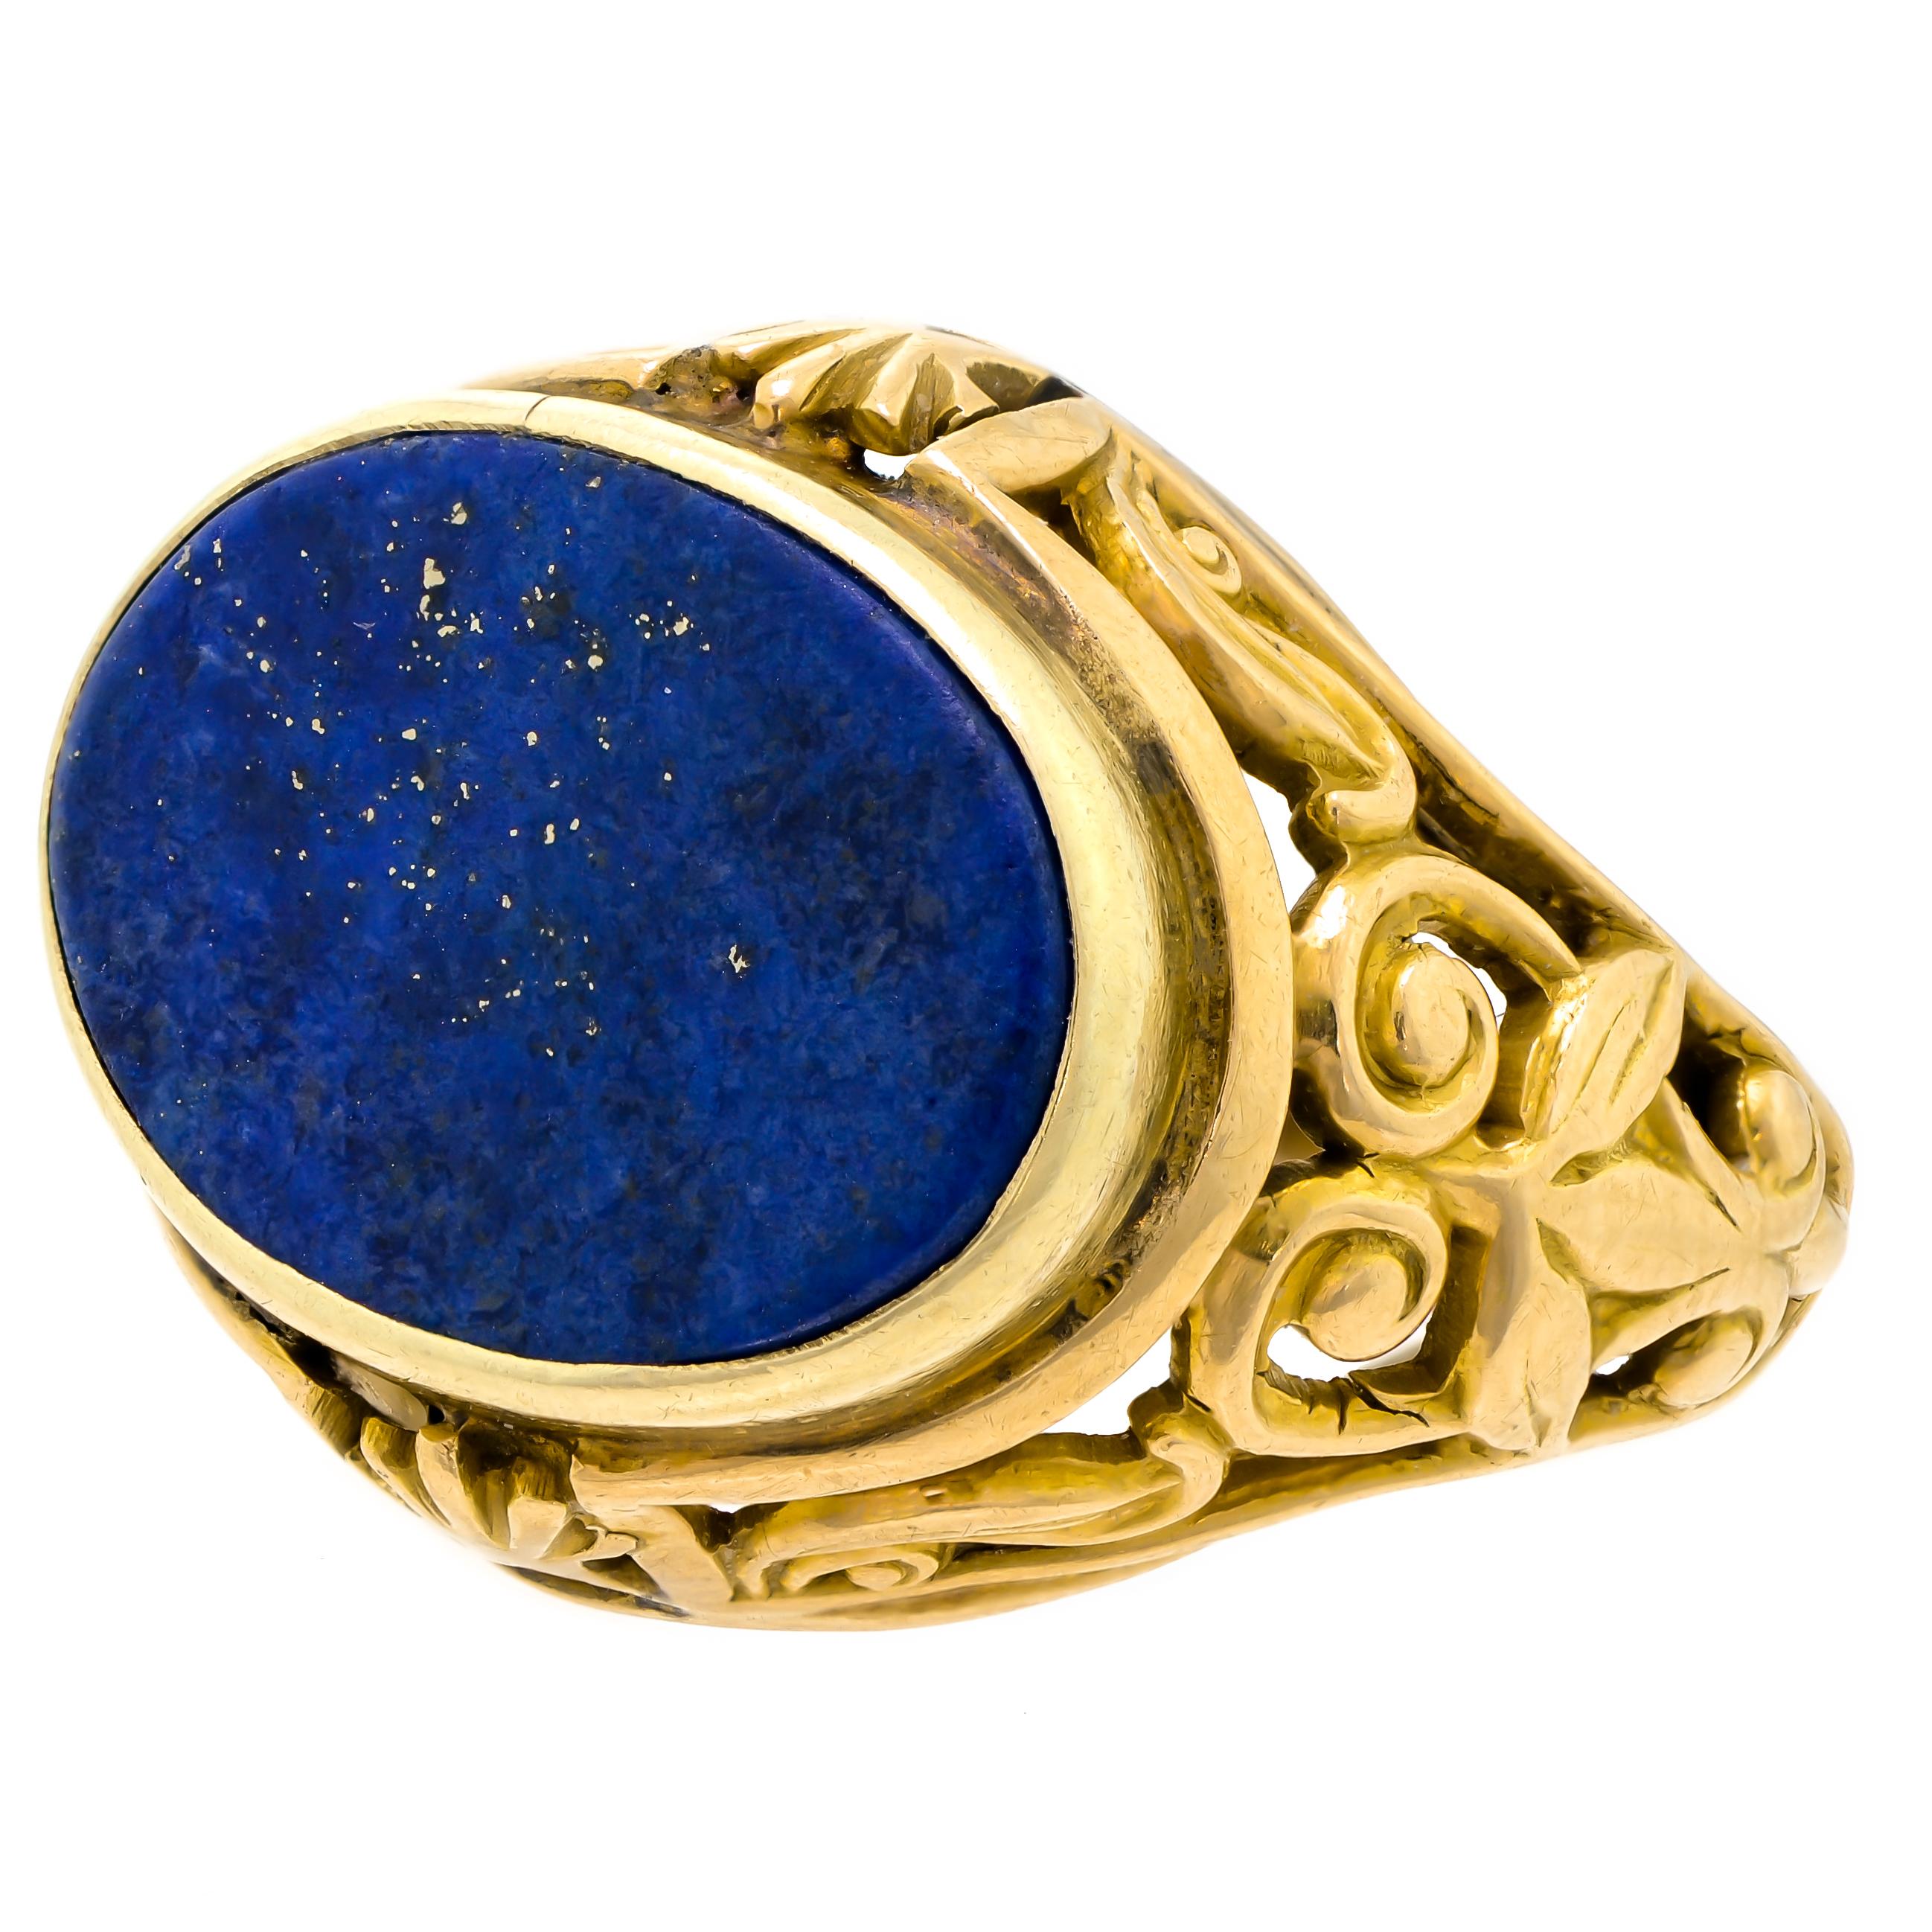 Attractive Victorian lapis ring crafted in 14kt yellow gold dating back to the 1900s. An artfully hand-engraved intricate design is depicted on each side of this stylized mount. Inside the magnificently adorned shank decorated with scrollwork, a 14k